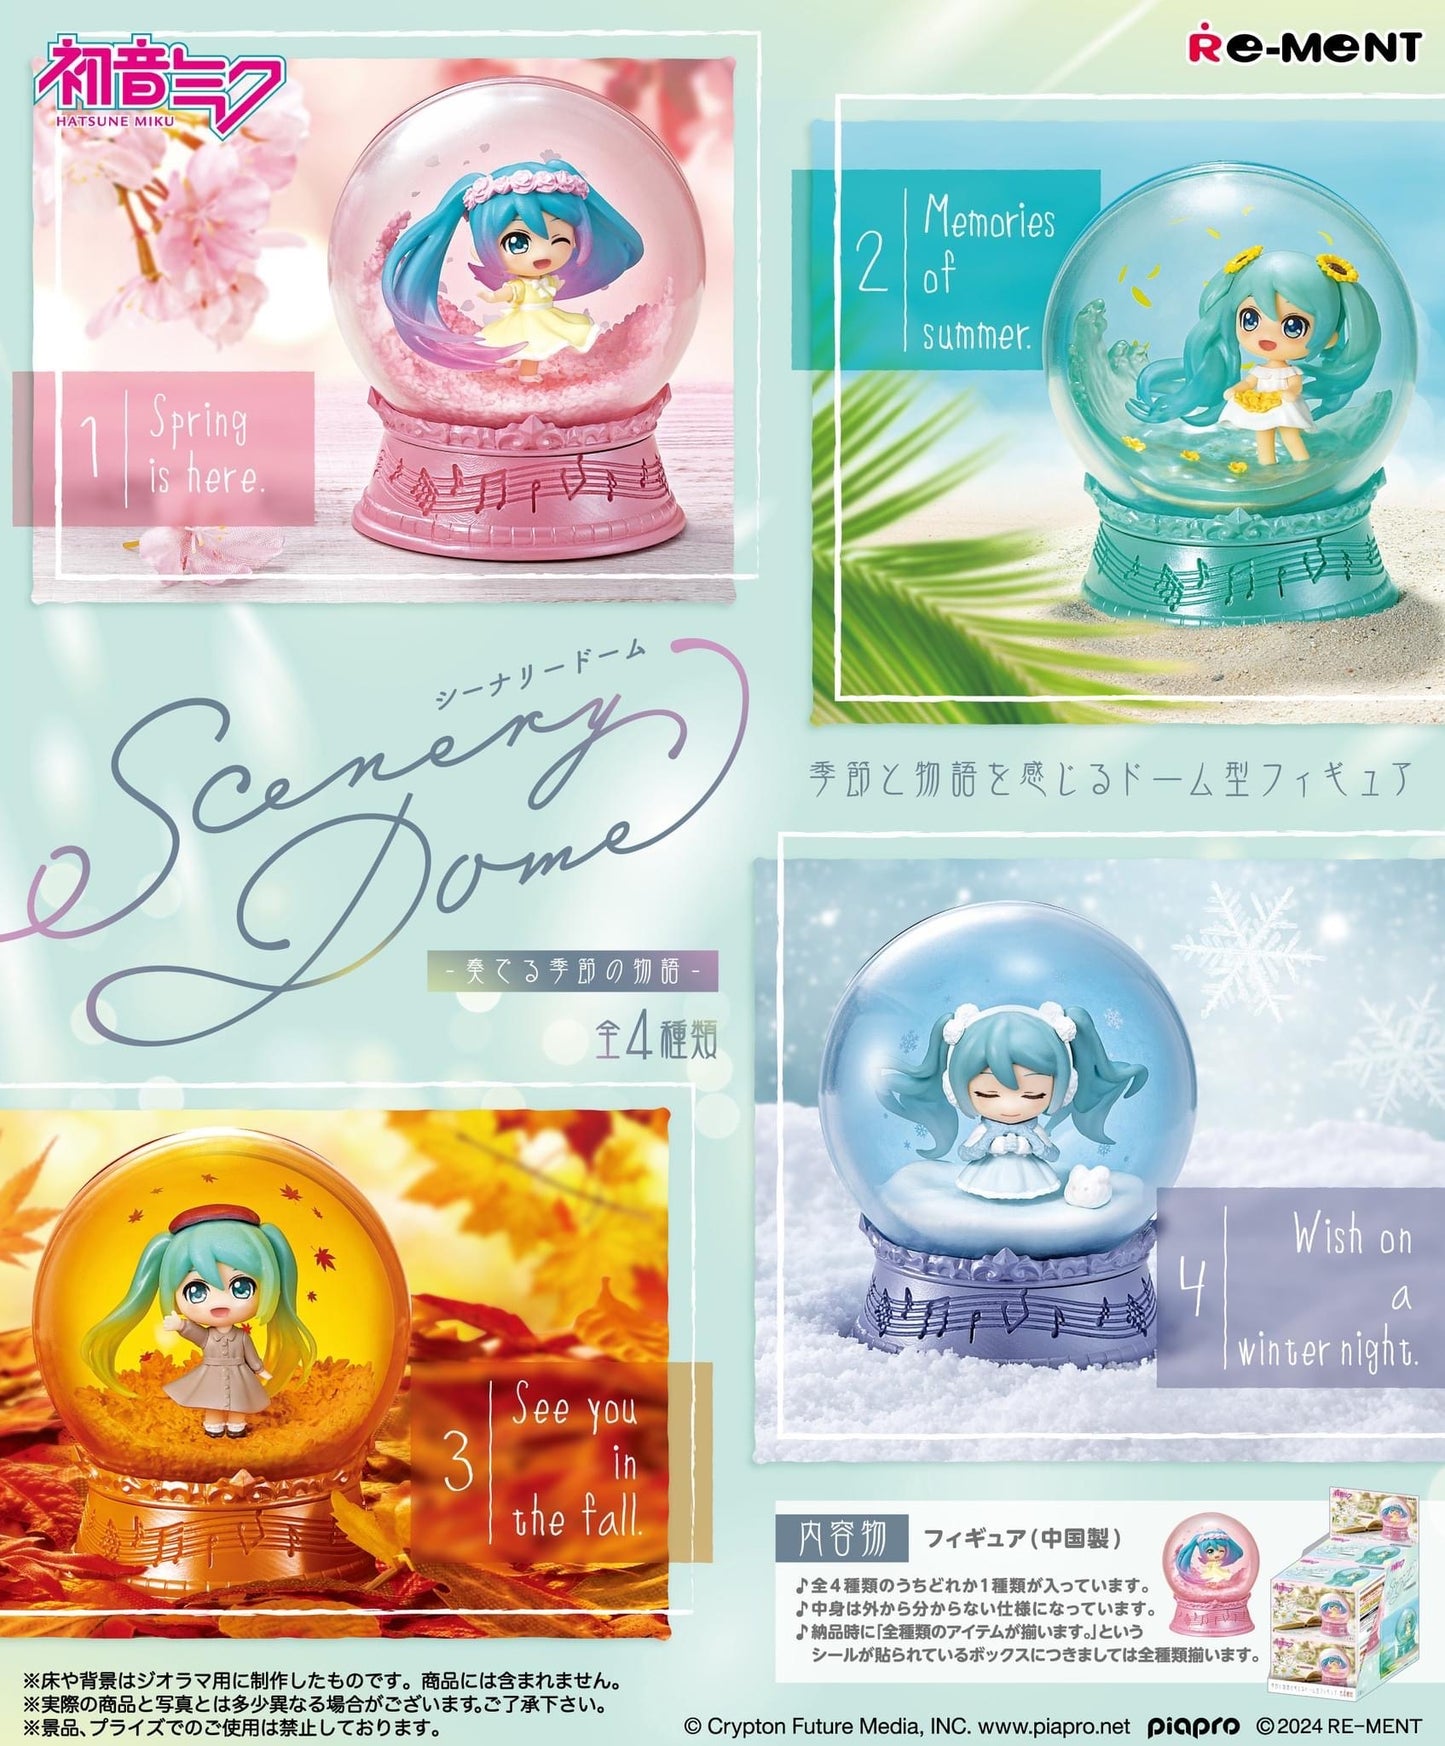 PREORDER - Hatsune Miku - all seasons dome figure from Rement - May 2024